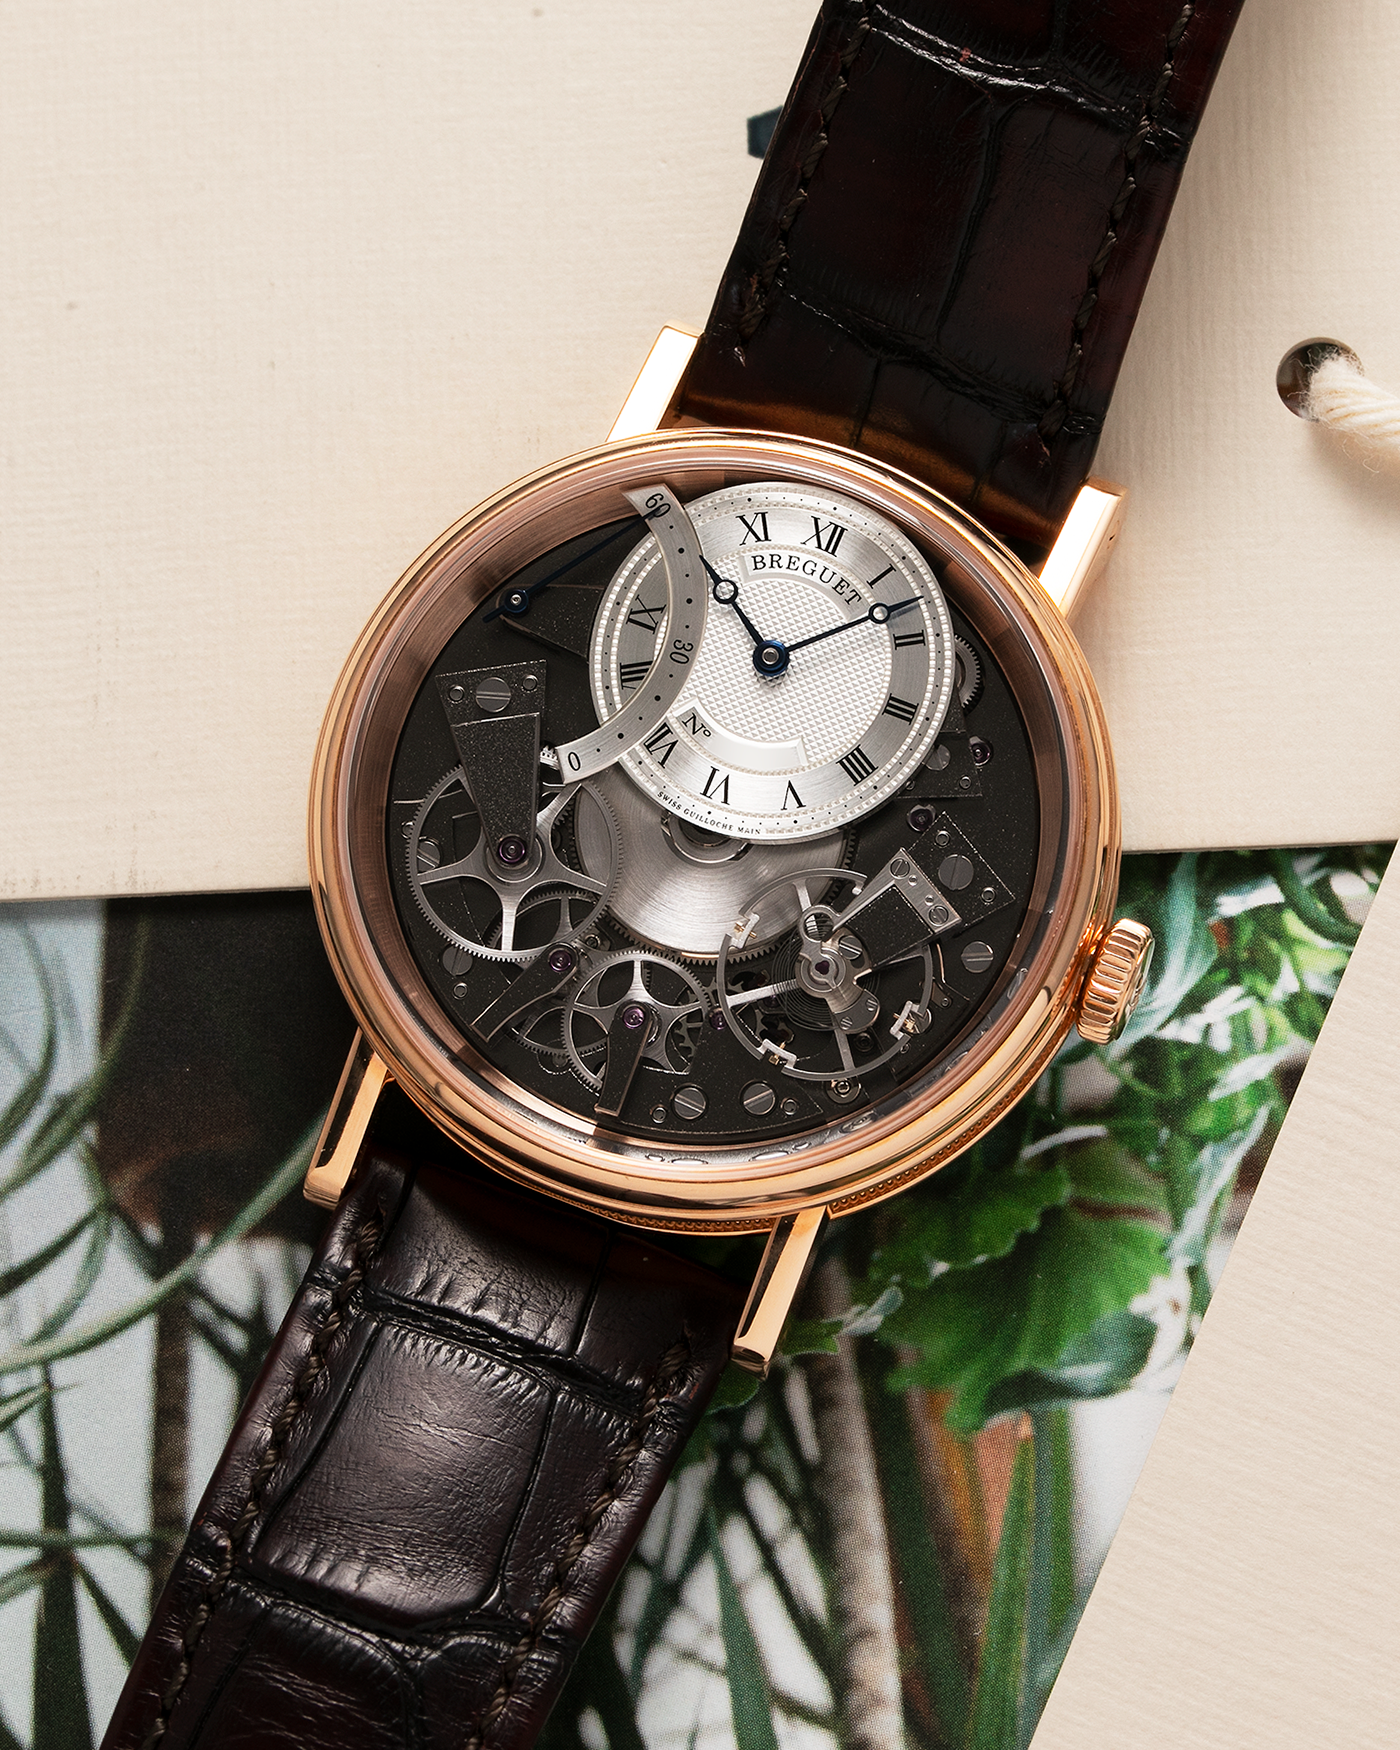 Brand: Breguet Year: 2022 Model: Tradition Automatique Seconde Retrograde Reference: 7097 Material: 18-carat Rose Gold Movement: Breguet Cal. 505 SR1, Self-Winding Case Diameter: 40mm Strap: Breguet Medium Brown Alligator Strap with signed 18-carat Rose Gold Tang Buckle